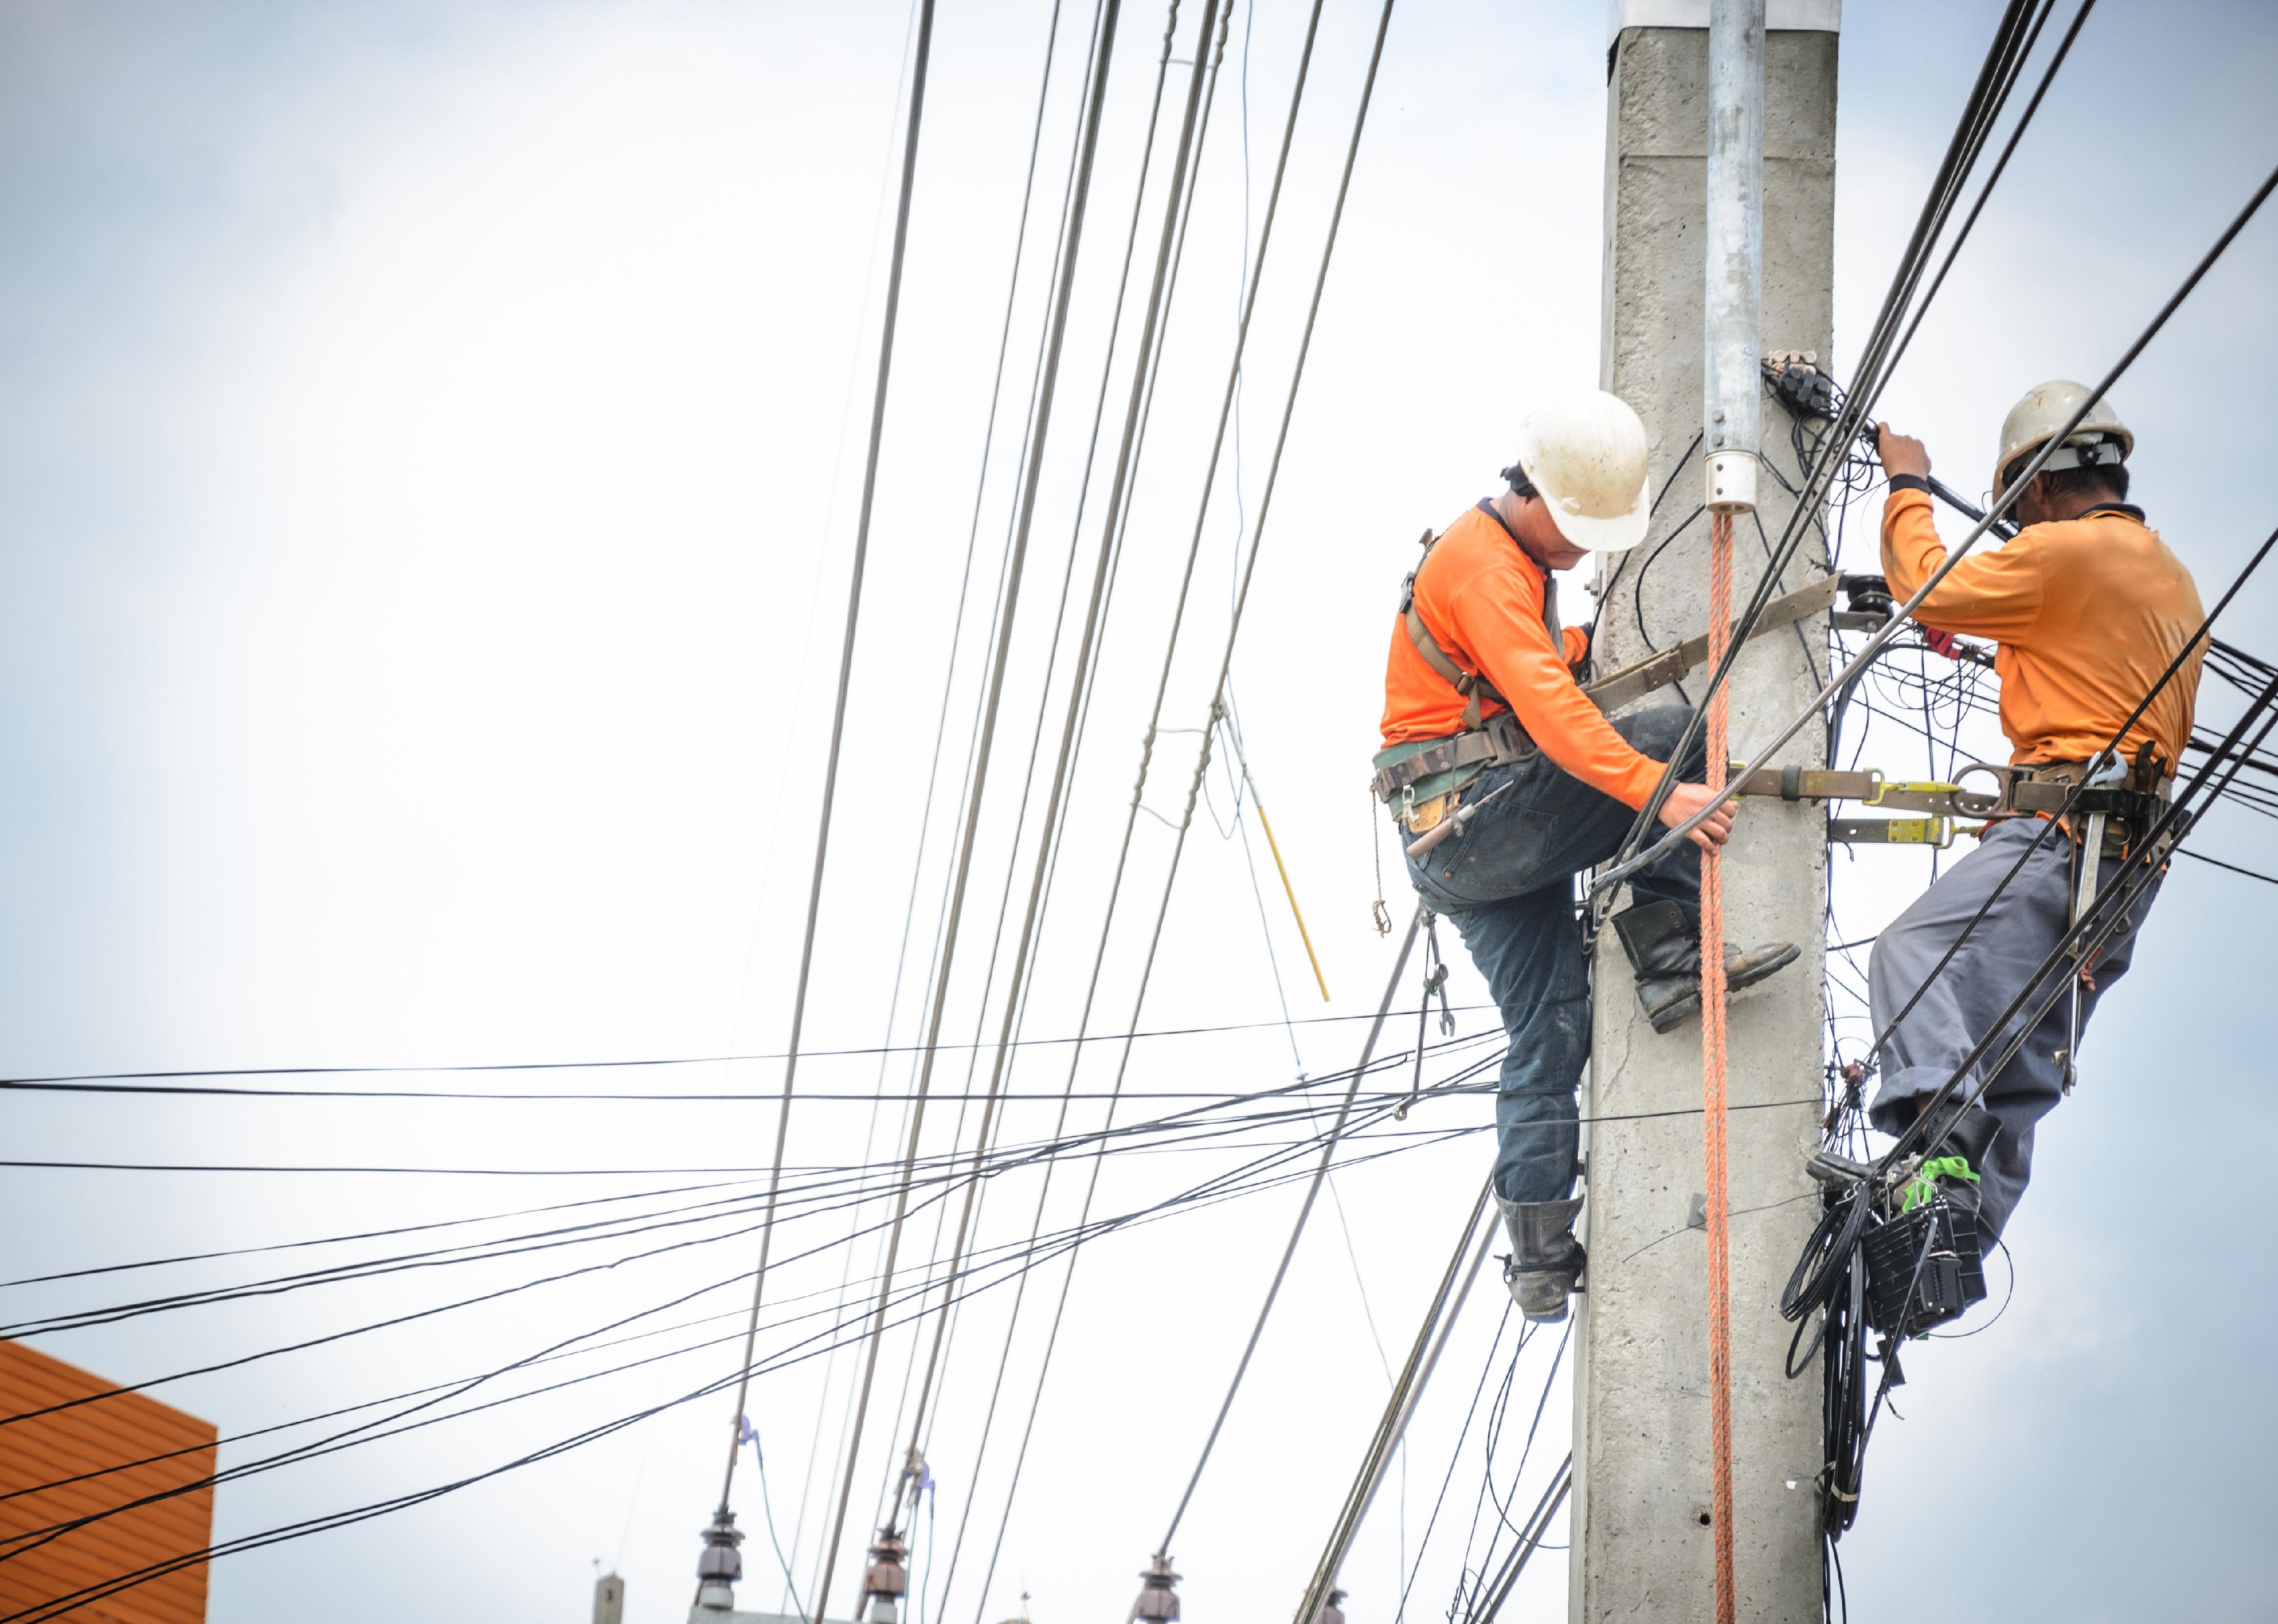 Electricians climbing on electric poles to repair power lines.